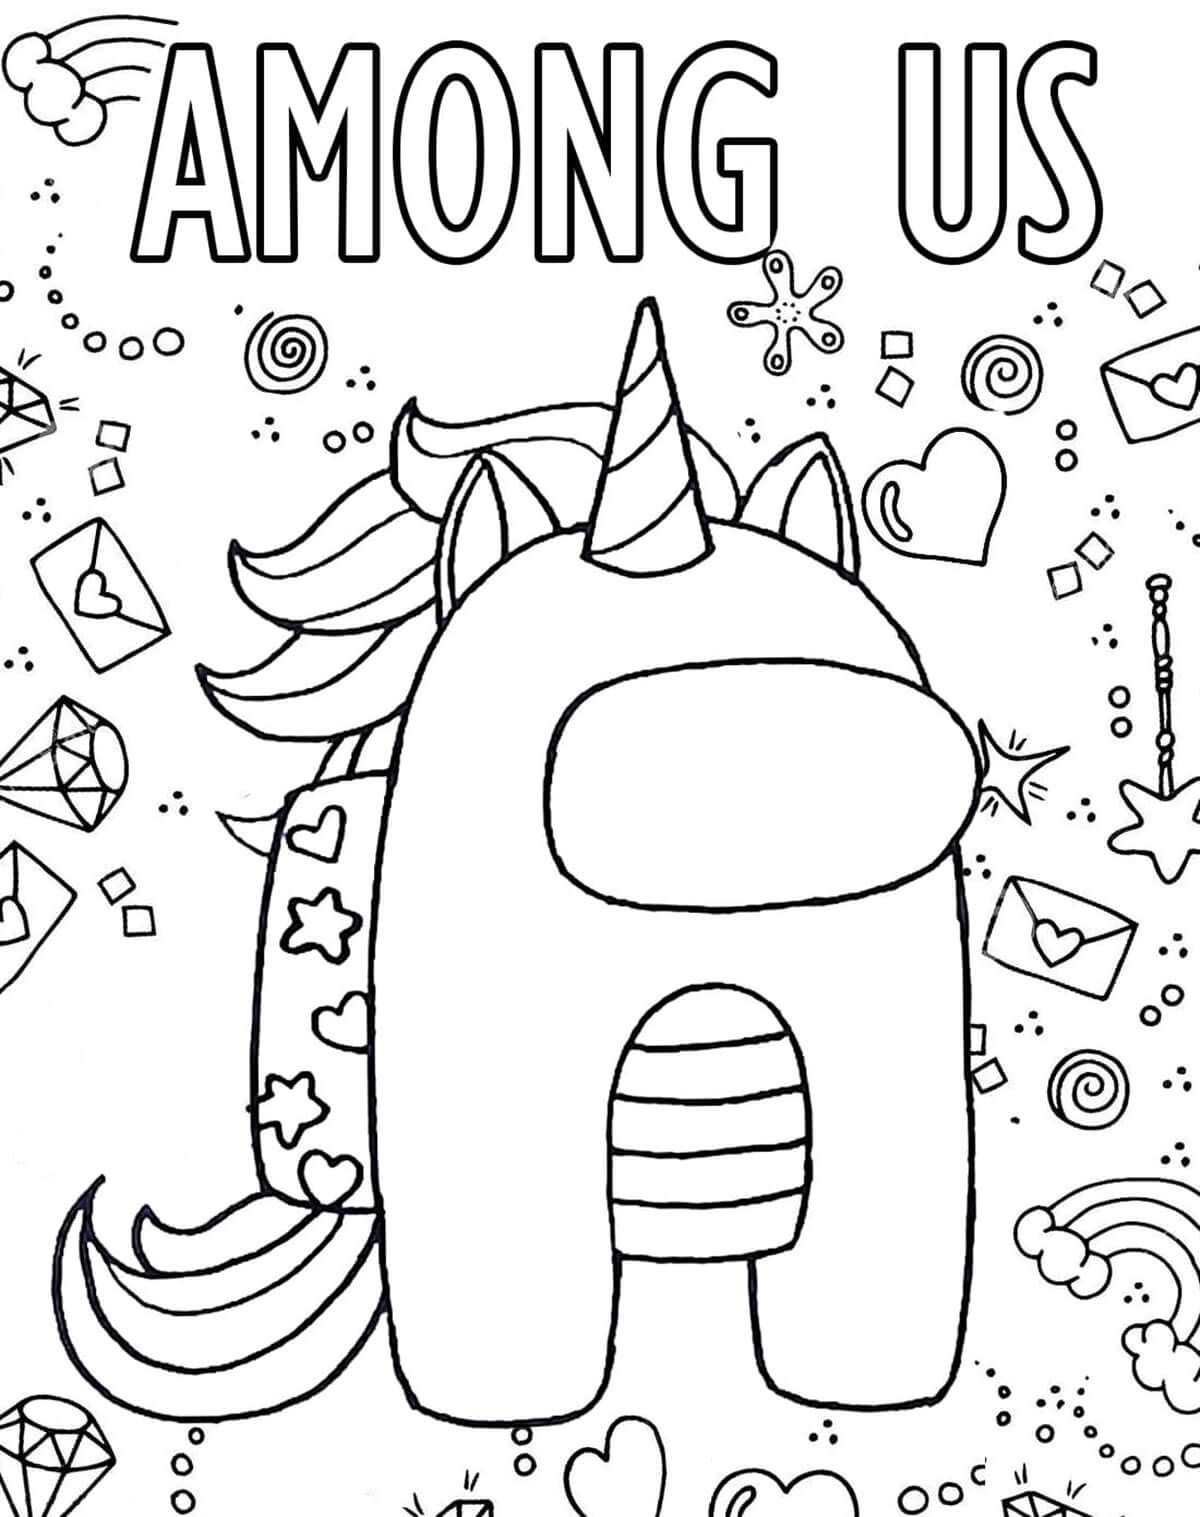 Download Among Us Unicorn Coloring Page Free Printable Coloring Pages For Kids